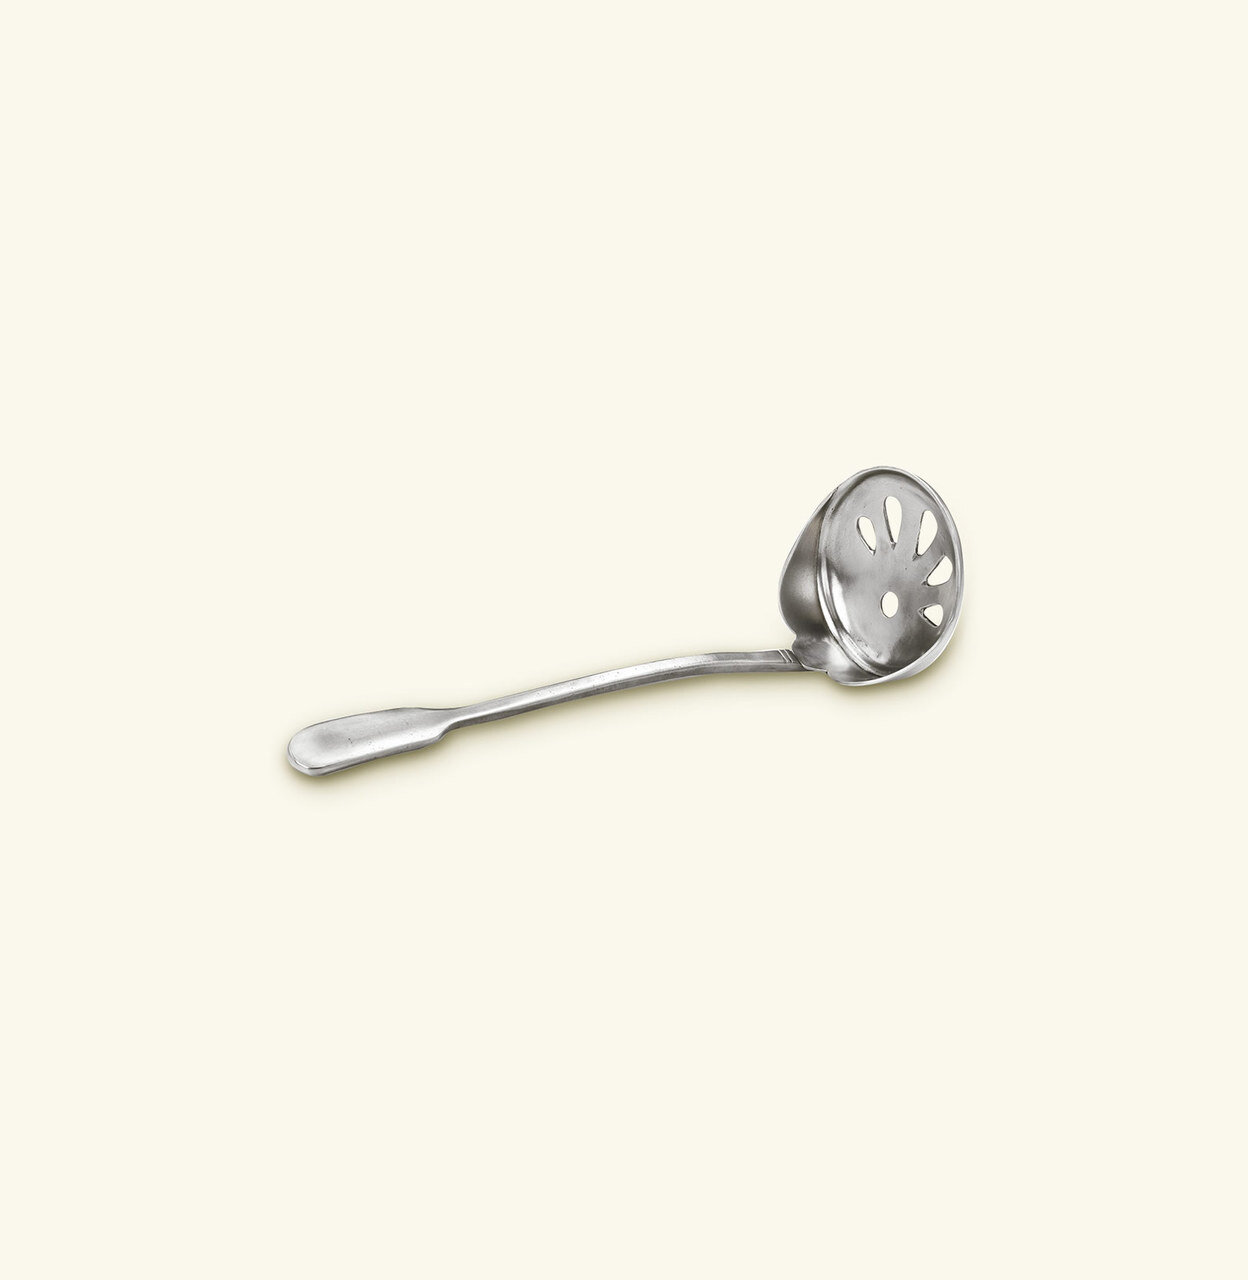 Match Pewter Ice Scoop a840.0